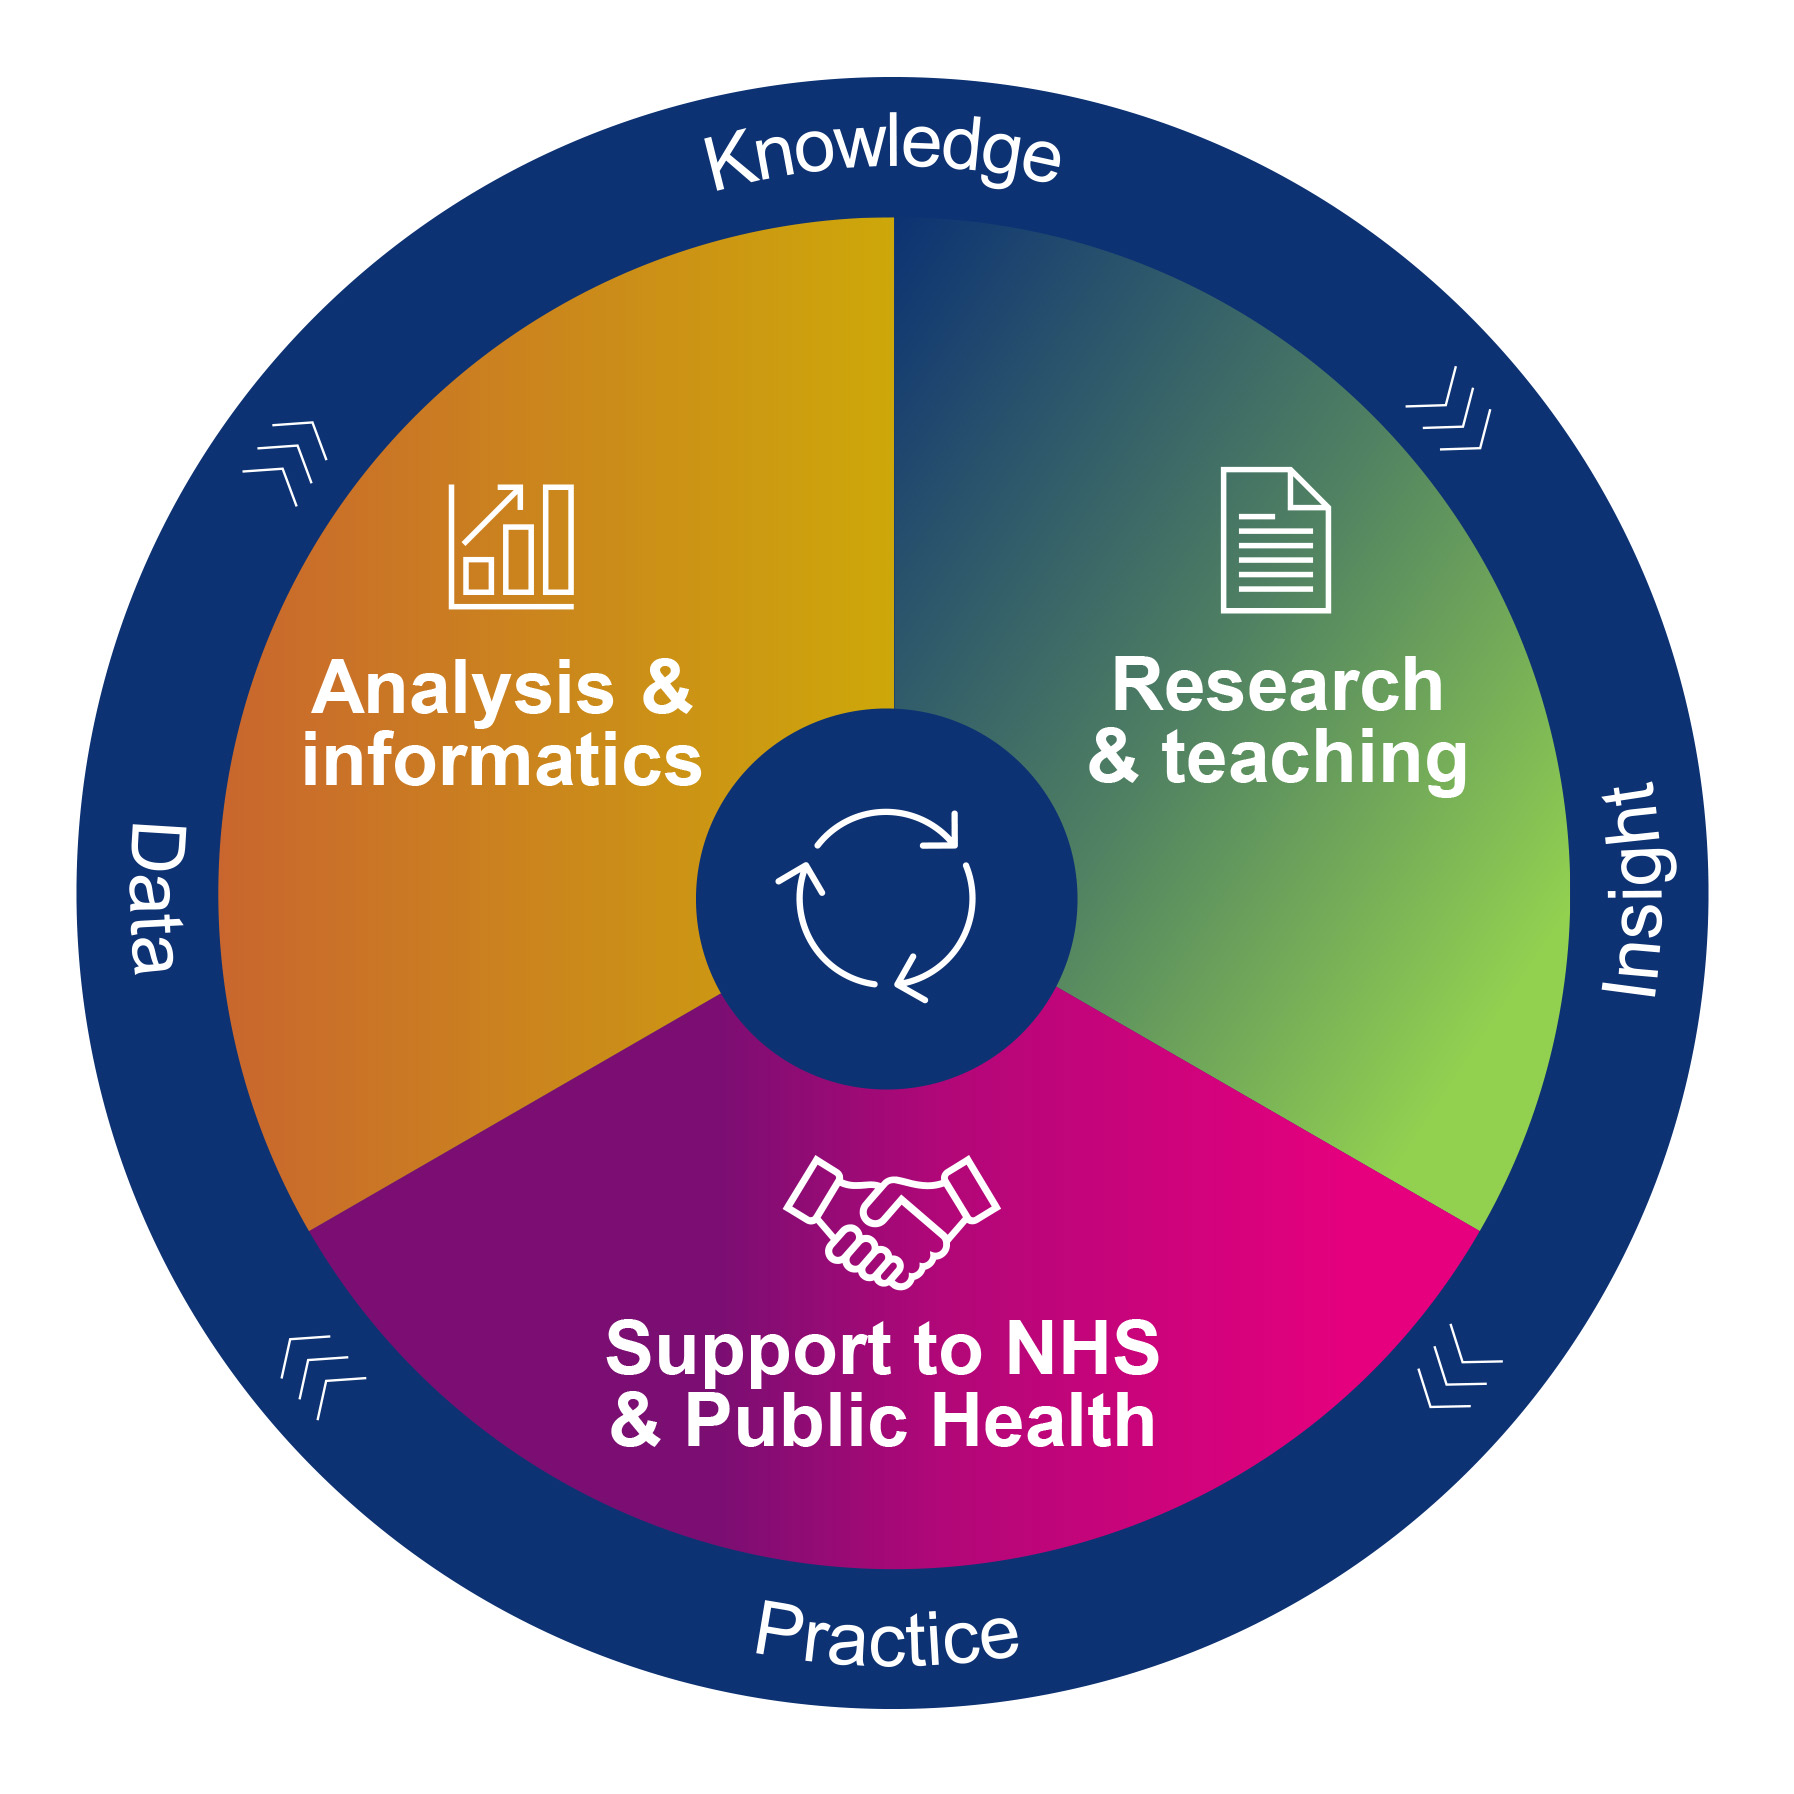 What we do graphic - analysis and informatics, research and teaching, support to NHS and public health